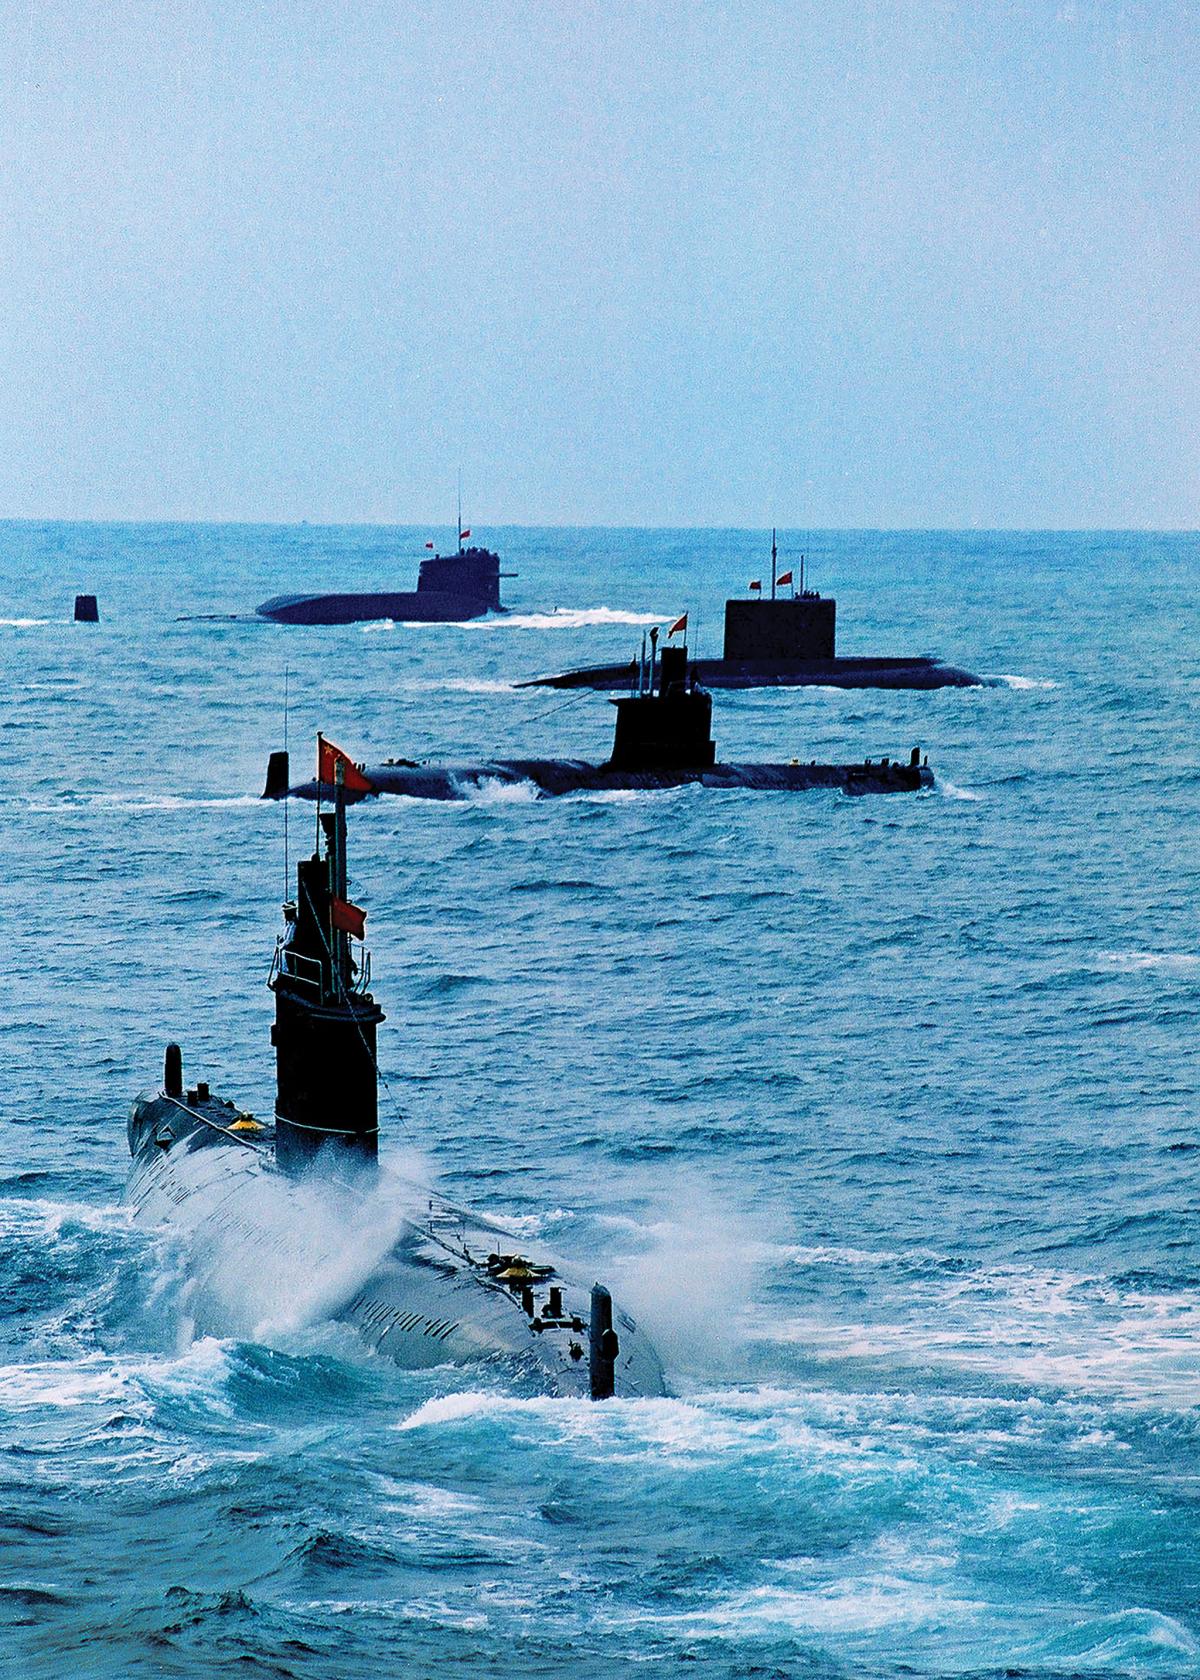 A Chinese navy nuclear submarine takes part in a drill with other submarines in Qingdao in east China's Shandong province. China declassified its first fleet of nuclear submarines for the first time on Sunday, Oct. 27, 2013